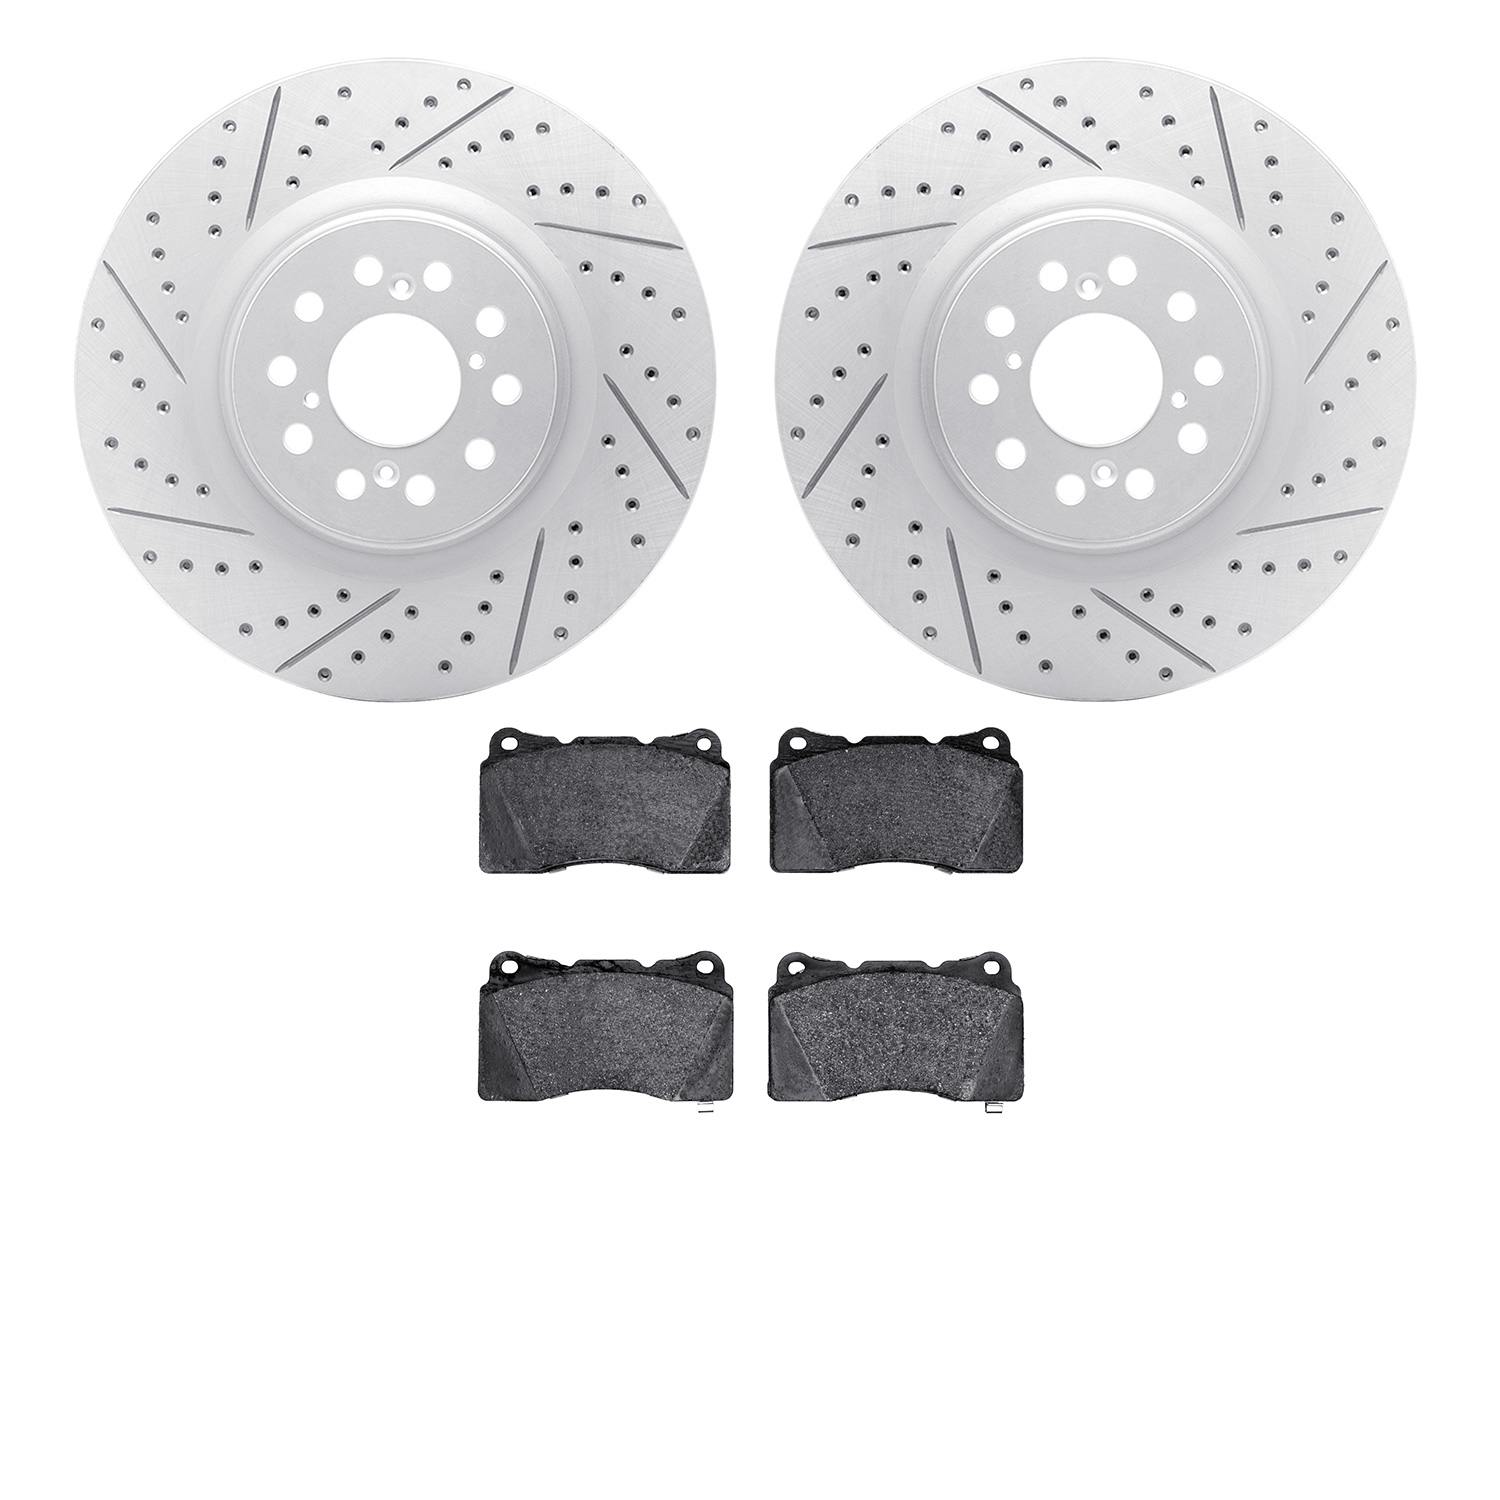 2502-59106 Geoperformance Drilled/Slotted Rotors w/5000 Advanced Brake Pads Kit, 2020-2021 Acura/Honda, Position: Front